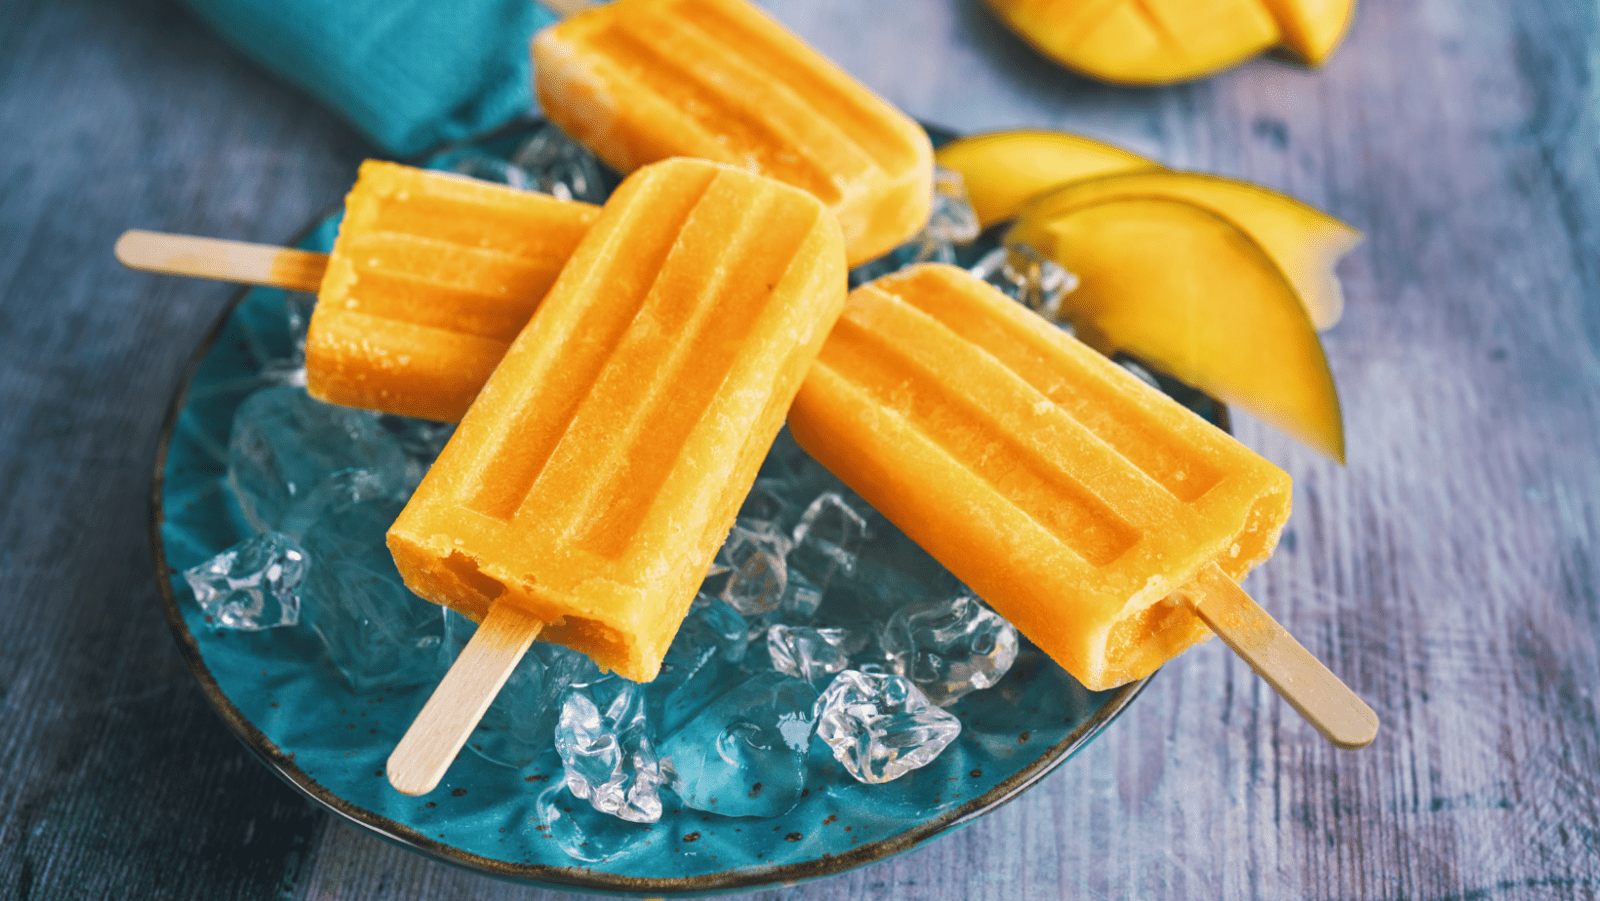 A plate of popsicles with bananas on top.